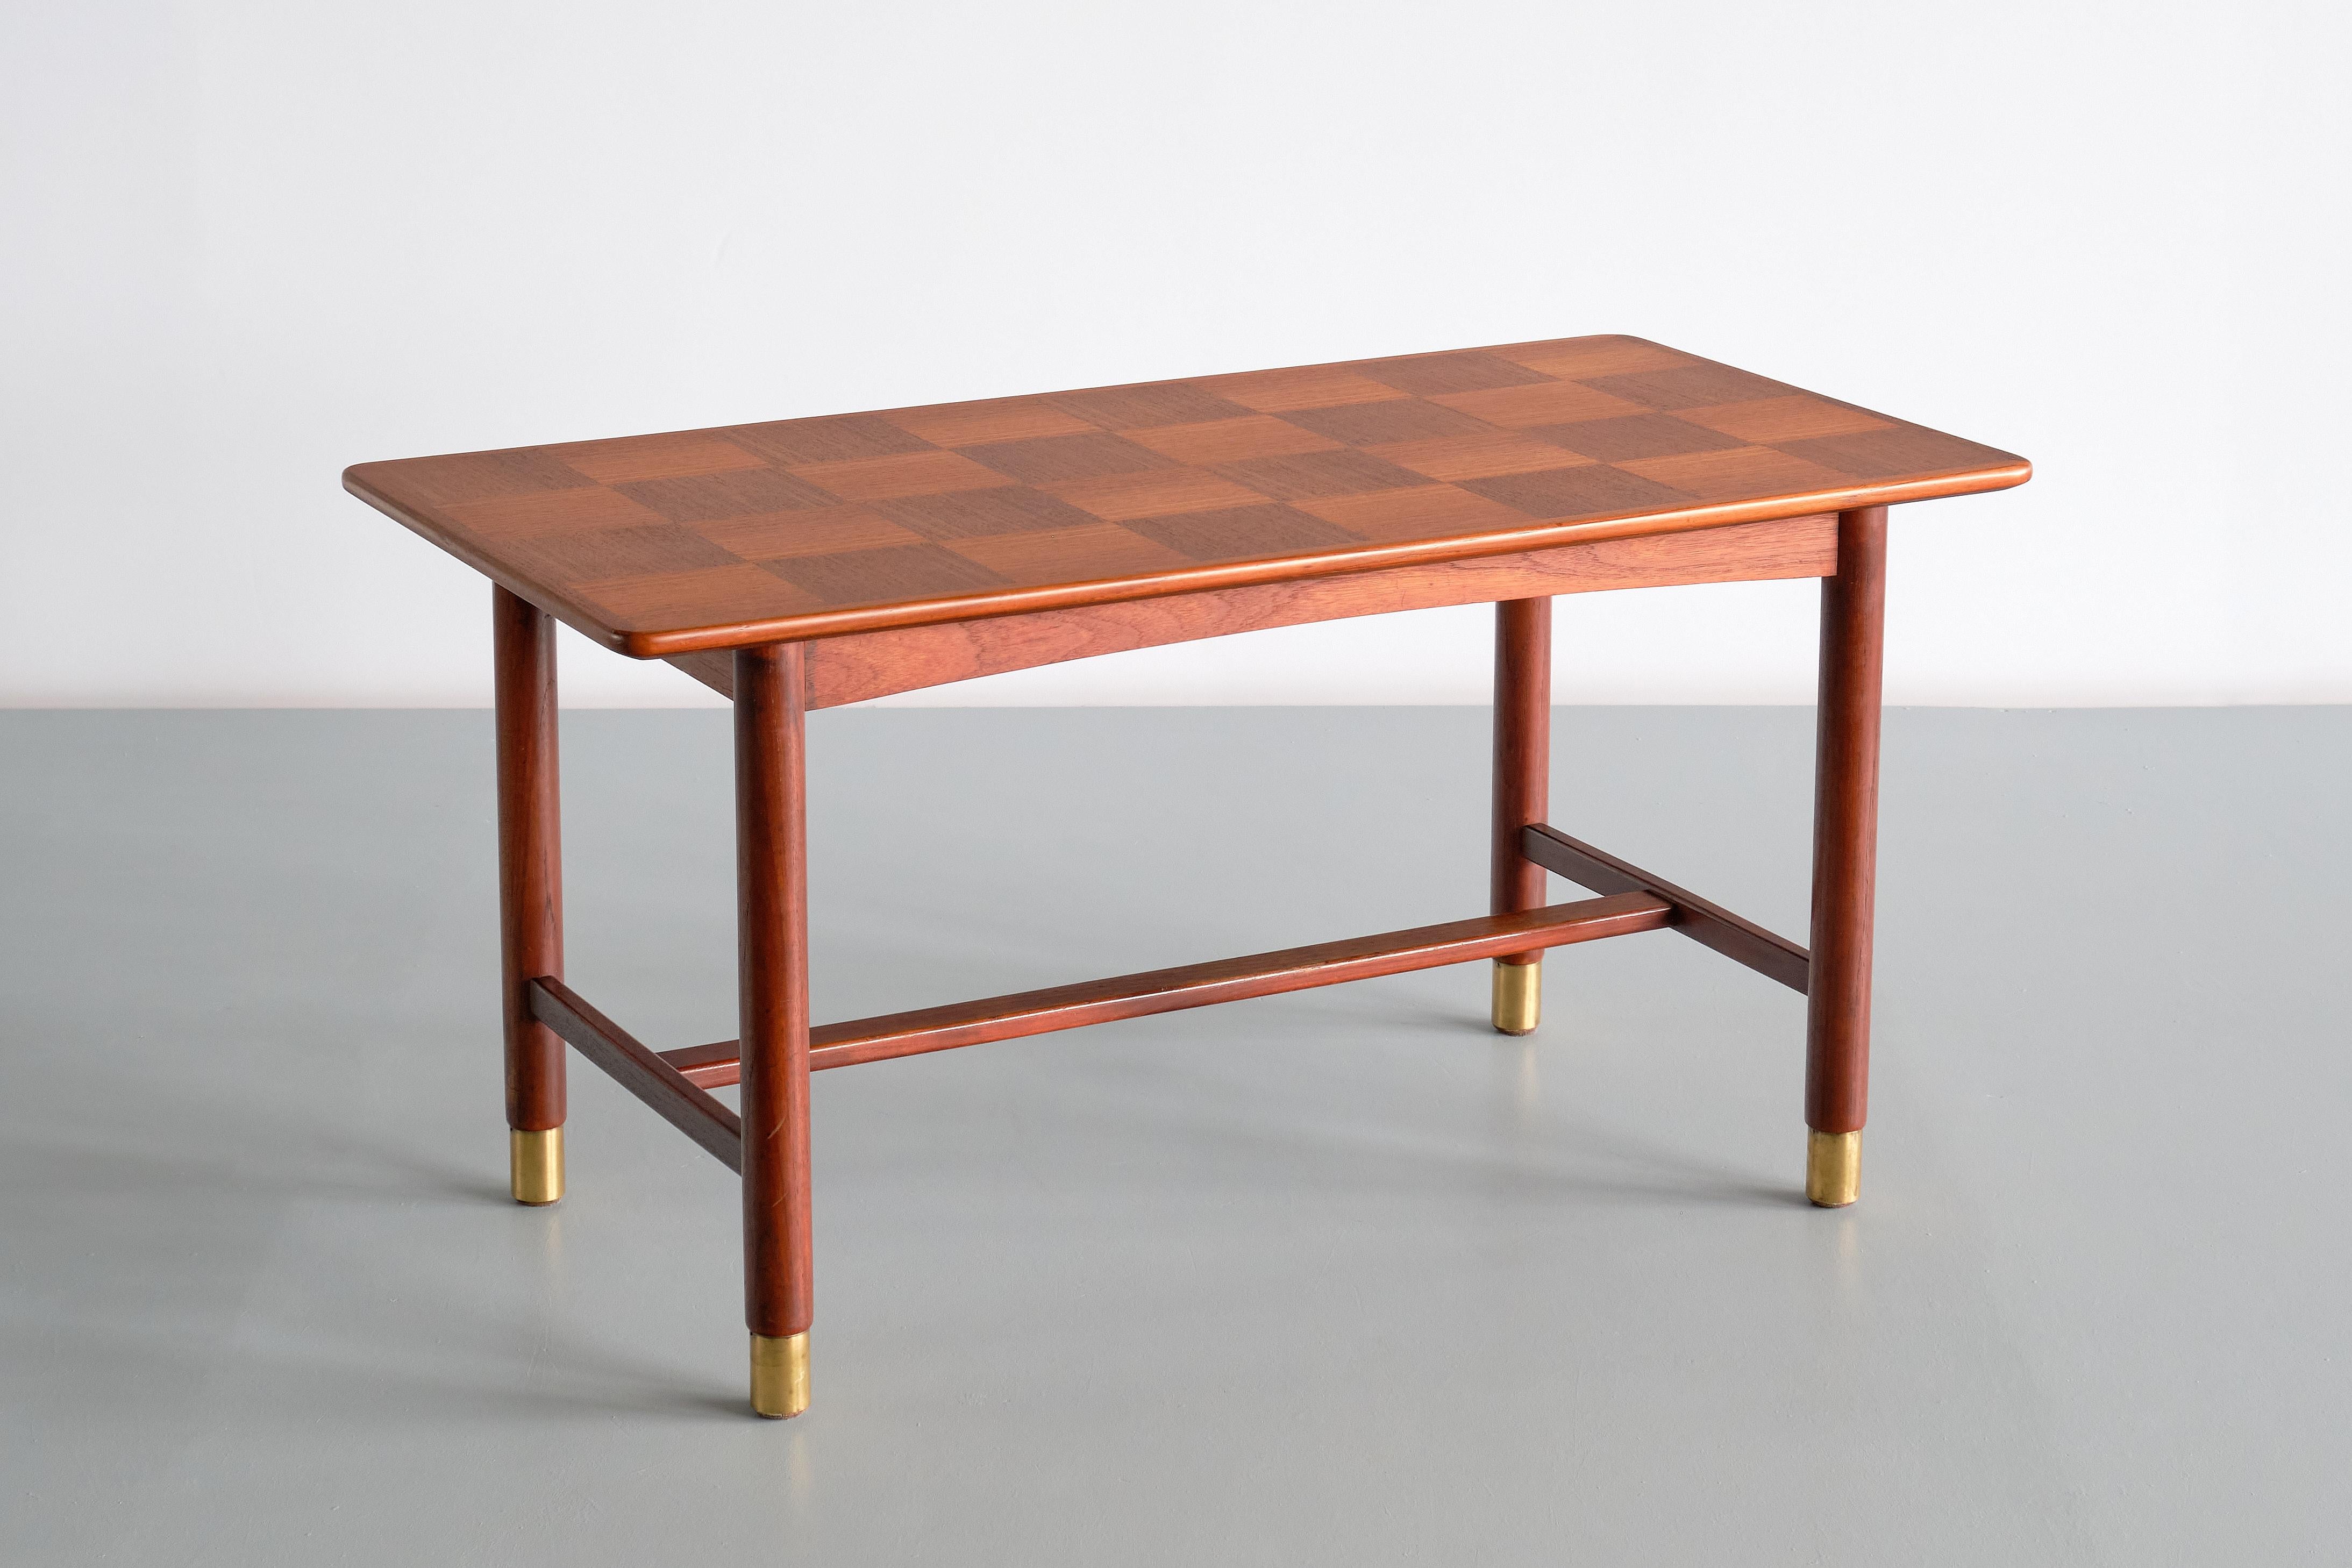 Carl Axel Acking Coffee Table in Teak and Brass, SMF Bodafors, Sweden, 1950s For Sale 3